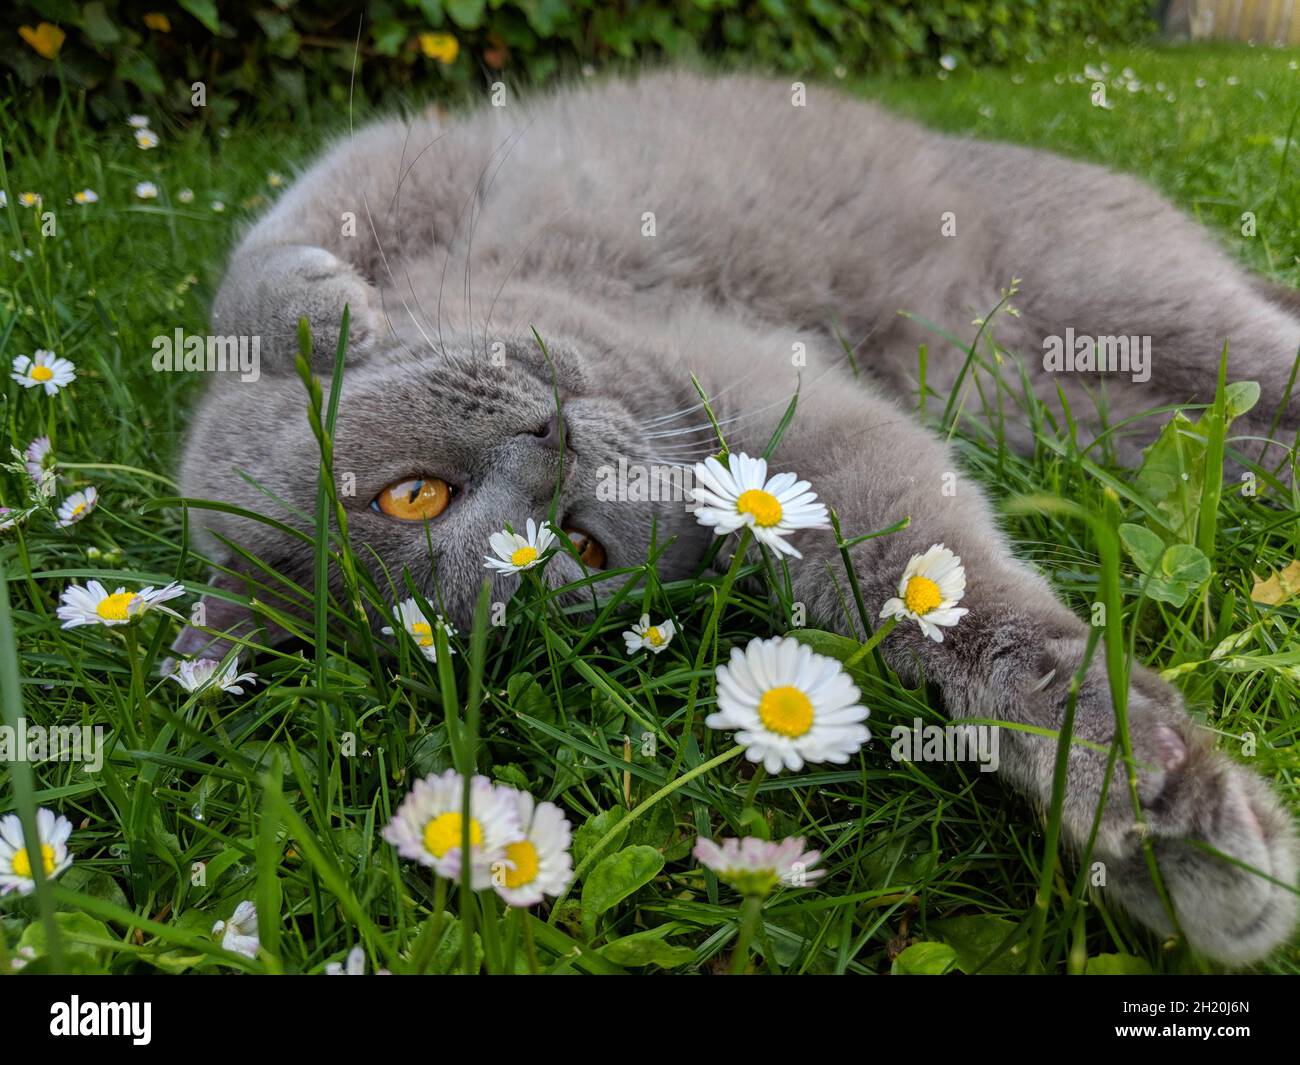 Cat on grass with daisy flower Stock Photo